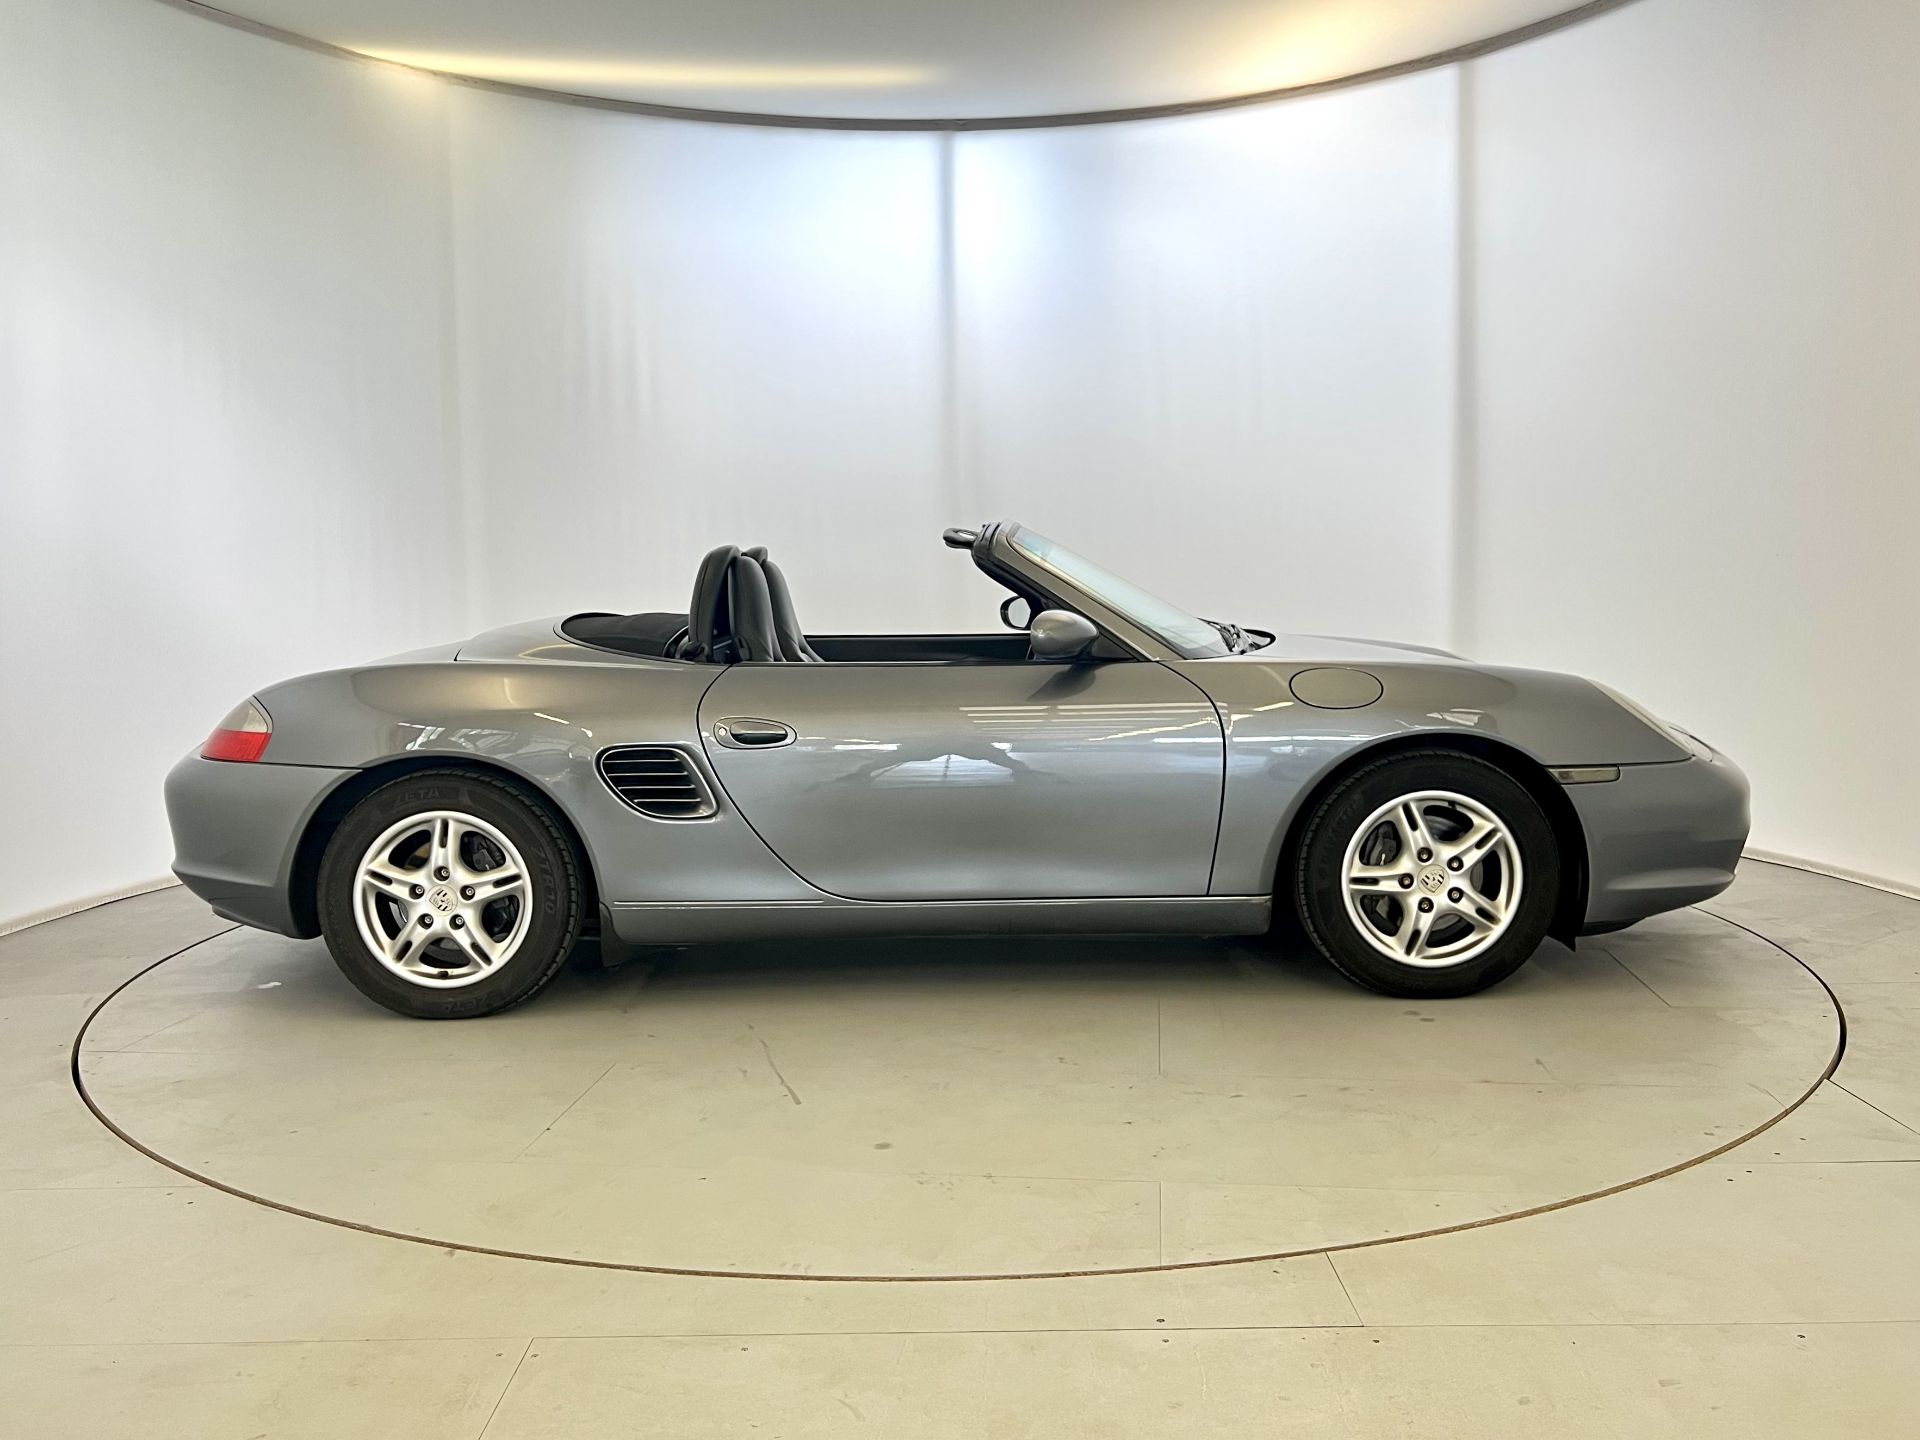 Porshe Boxster - Image 11 of 31